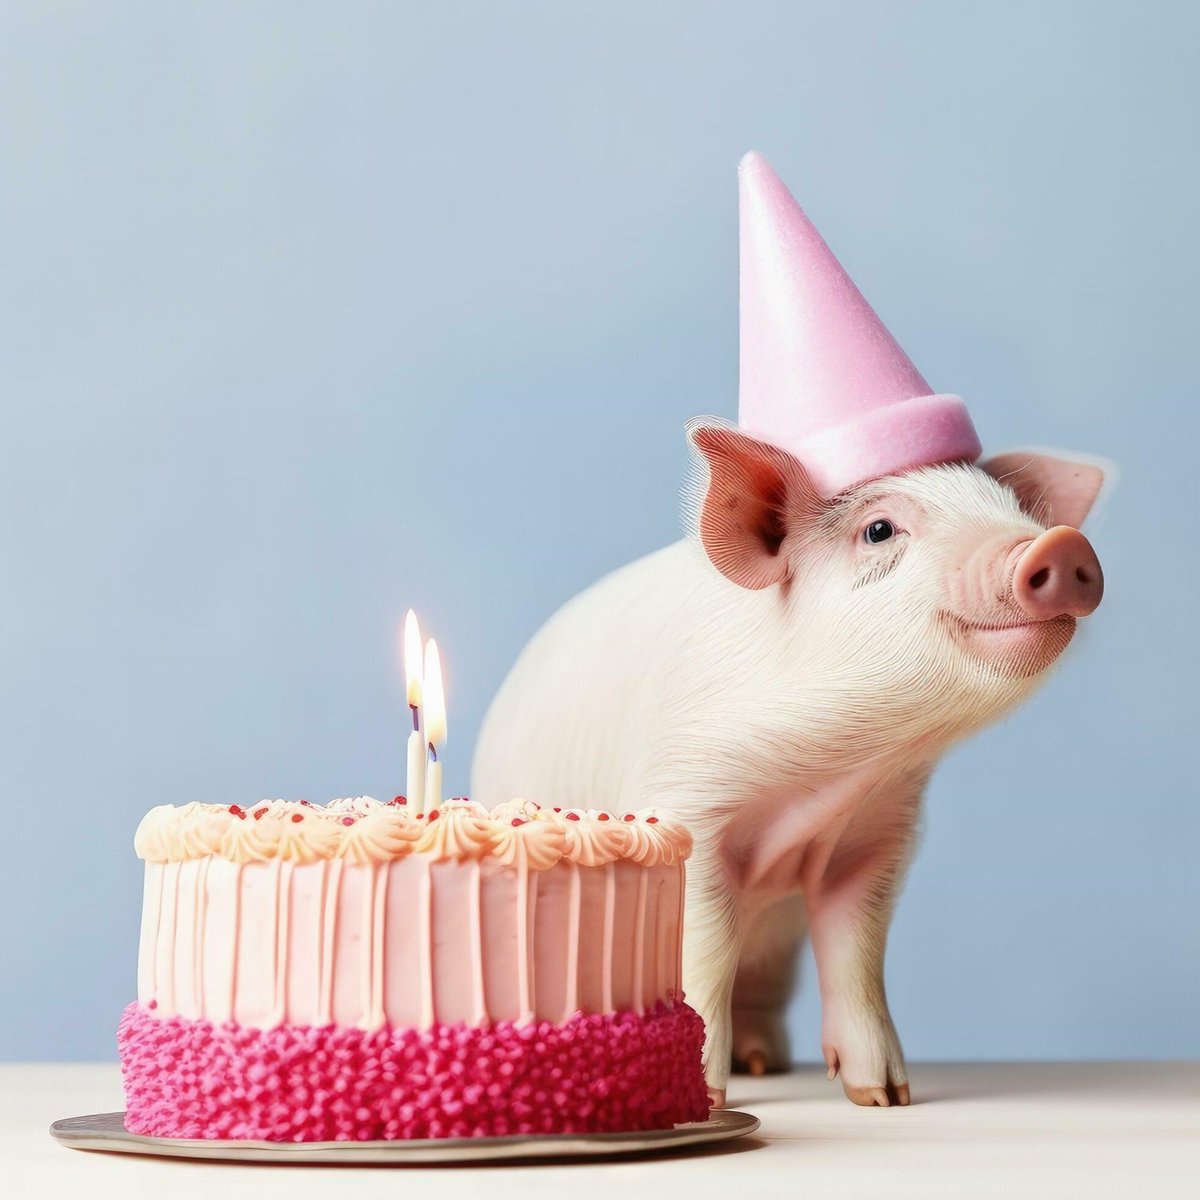 We're in full crunch mode for my bday celebration/mini-debut stream tomorrow night so please follow @squidnap_ink for all of our fun content, videos, animations, music videos + stream info etc. if you don't already. Hope to see you all tomorrow! <3 ~Noiri 🐖